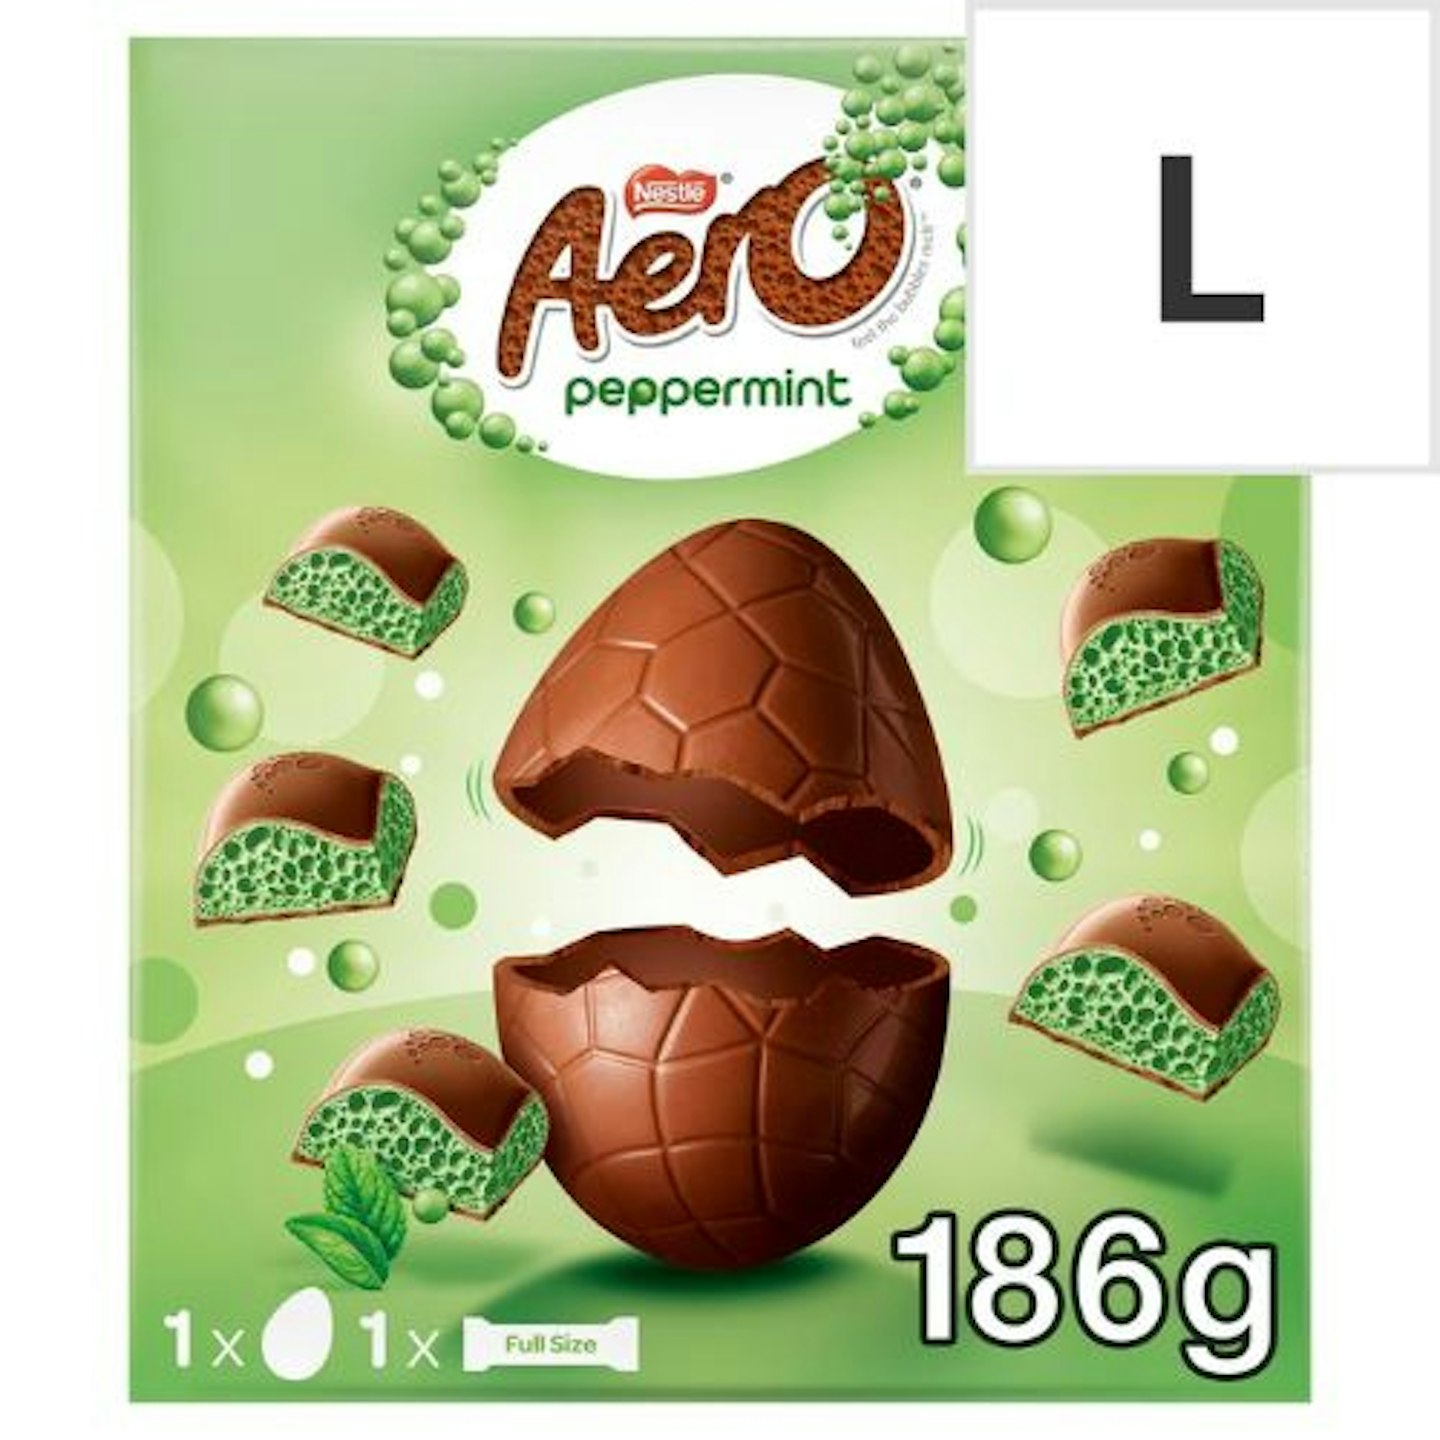 Aero Peppermint Milk Chocolate Easter Egg with Bar